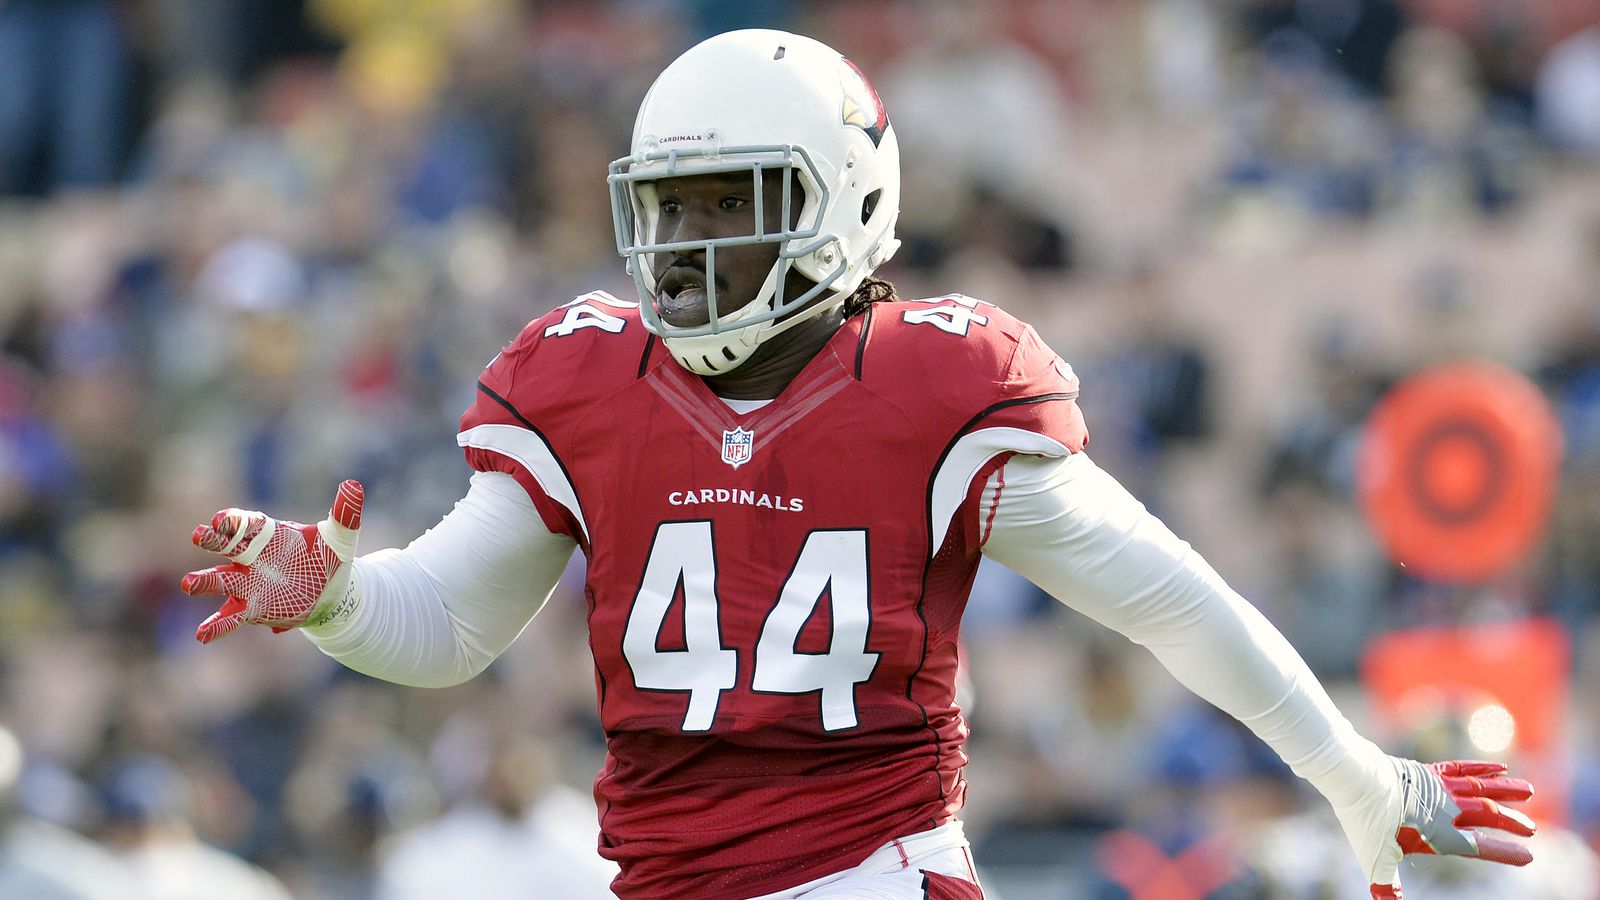 Arizona S Markus Golden Was Last Week S Best Pass Rusher And You Probably Didn T Even Notice Sbnation Com